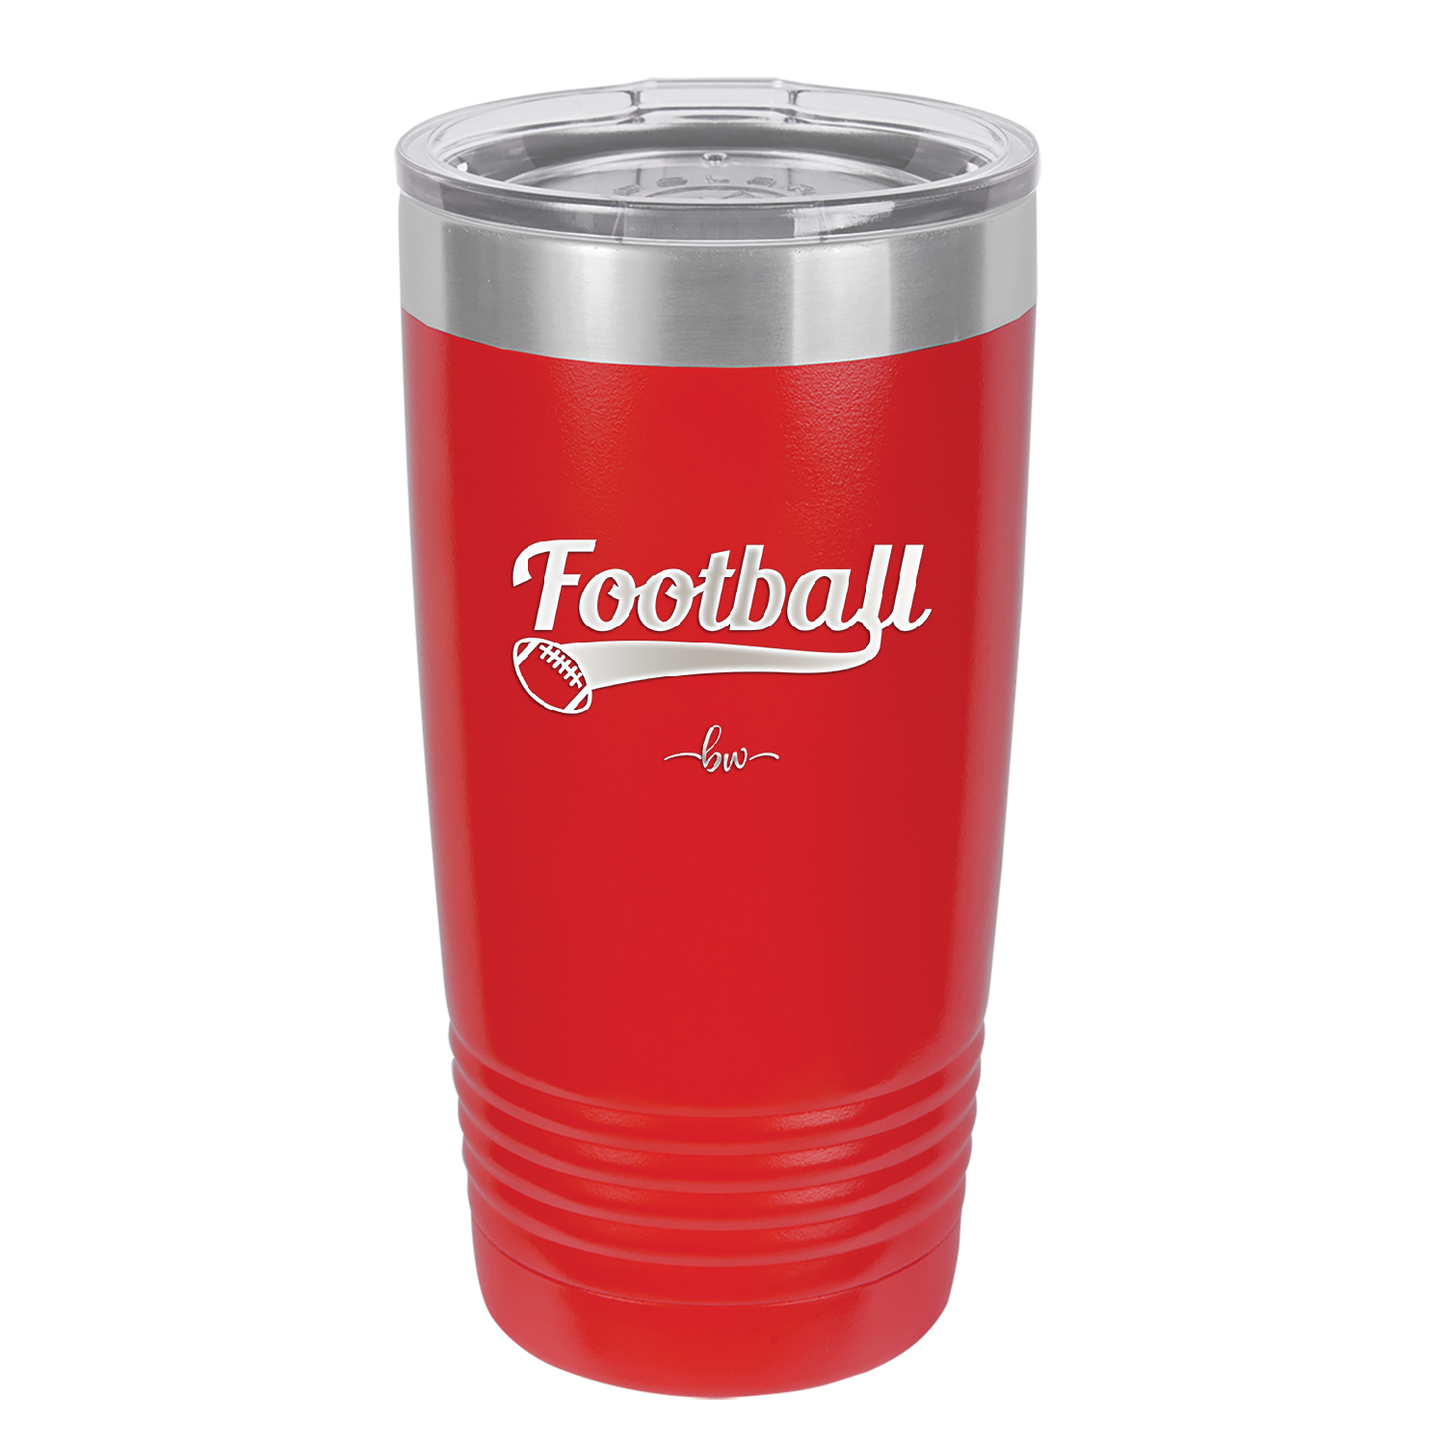 Football Text with Ball - Laser Engraved Stainless Steel Drinkware - 1891 -